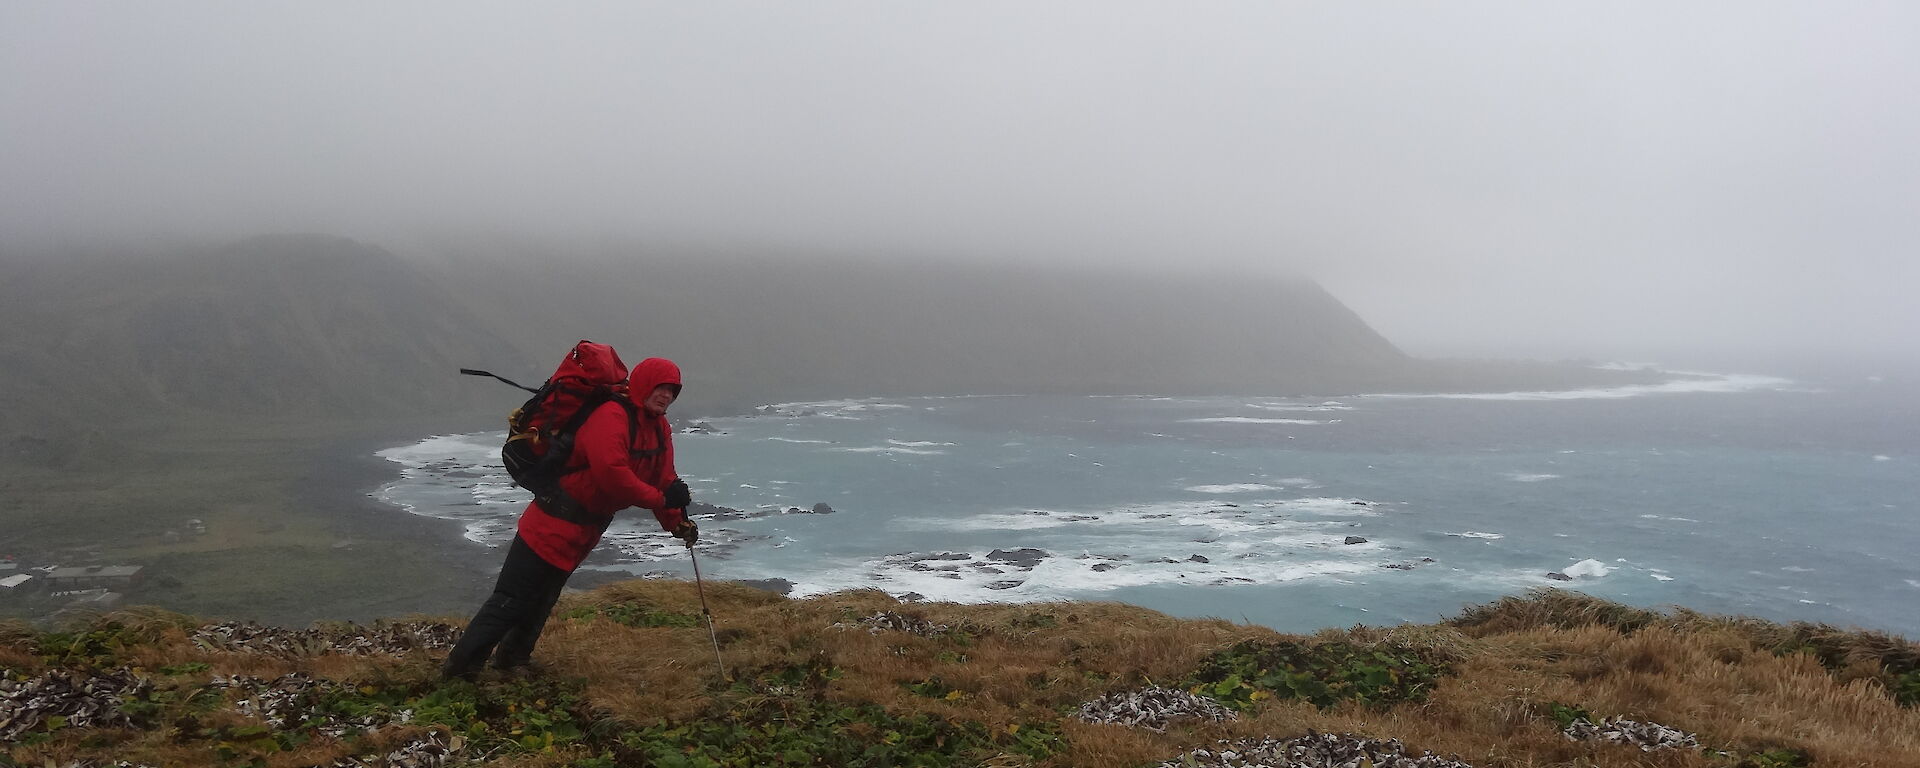 Dave wearing his red jacket and backpack at standing leaning on his walking pole at the top of North head with a view of Macquarie island with very low laying clouds and the ocean in the background.